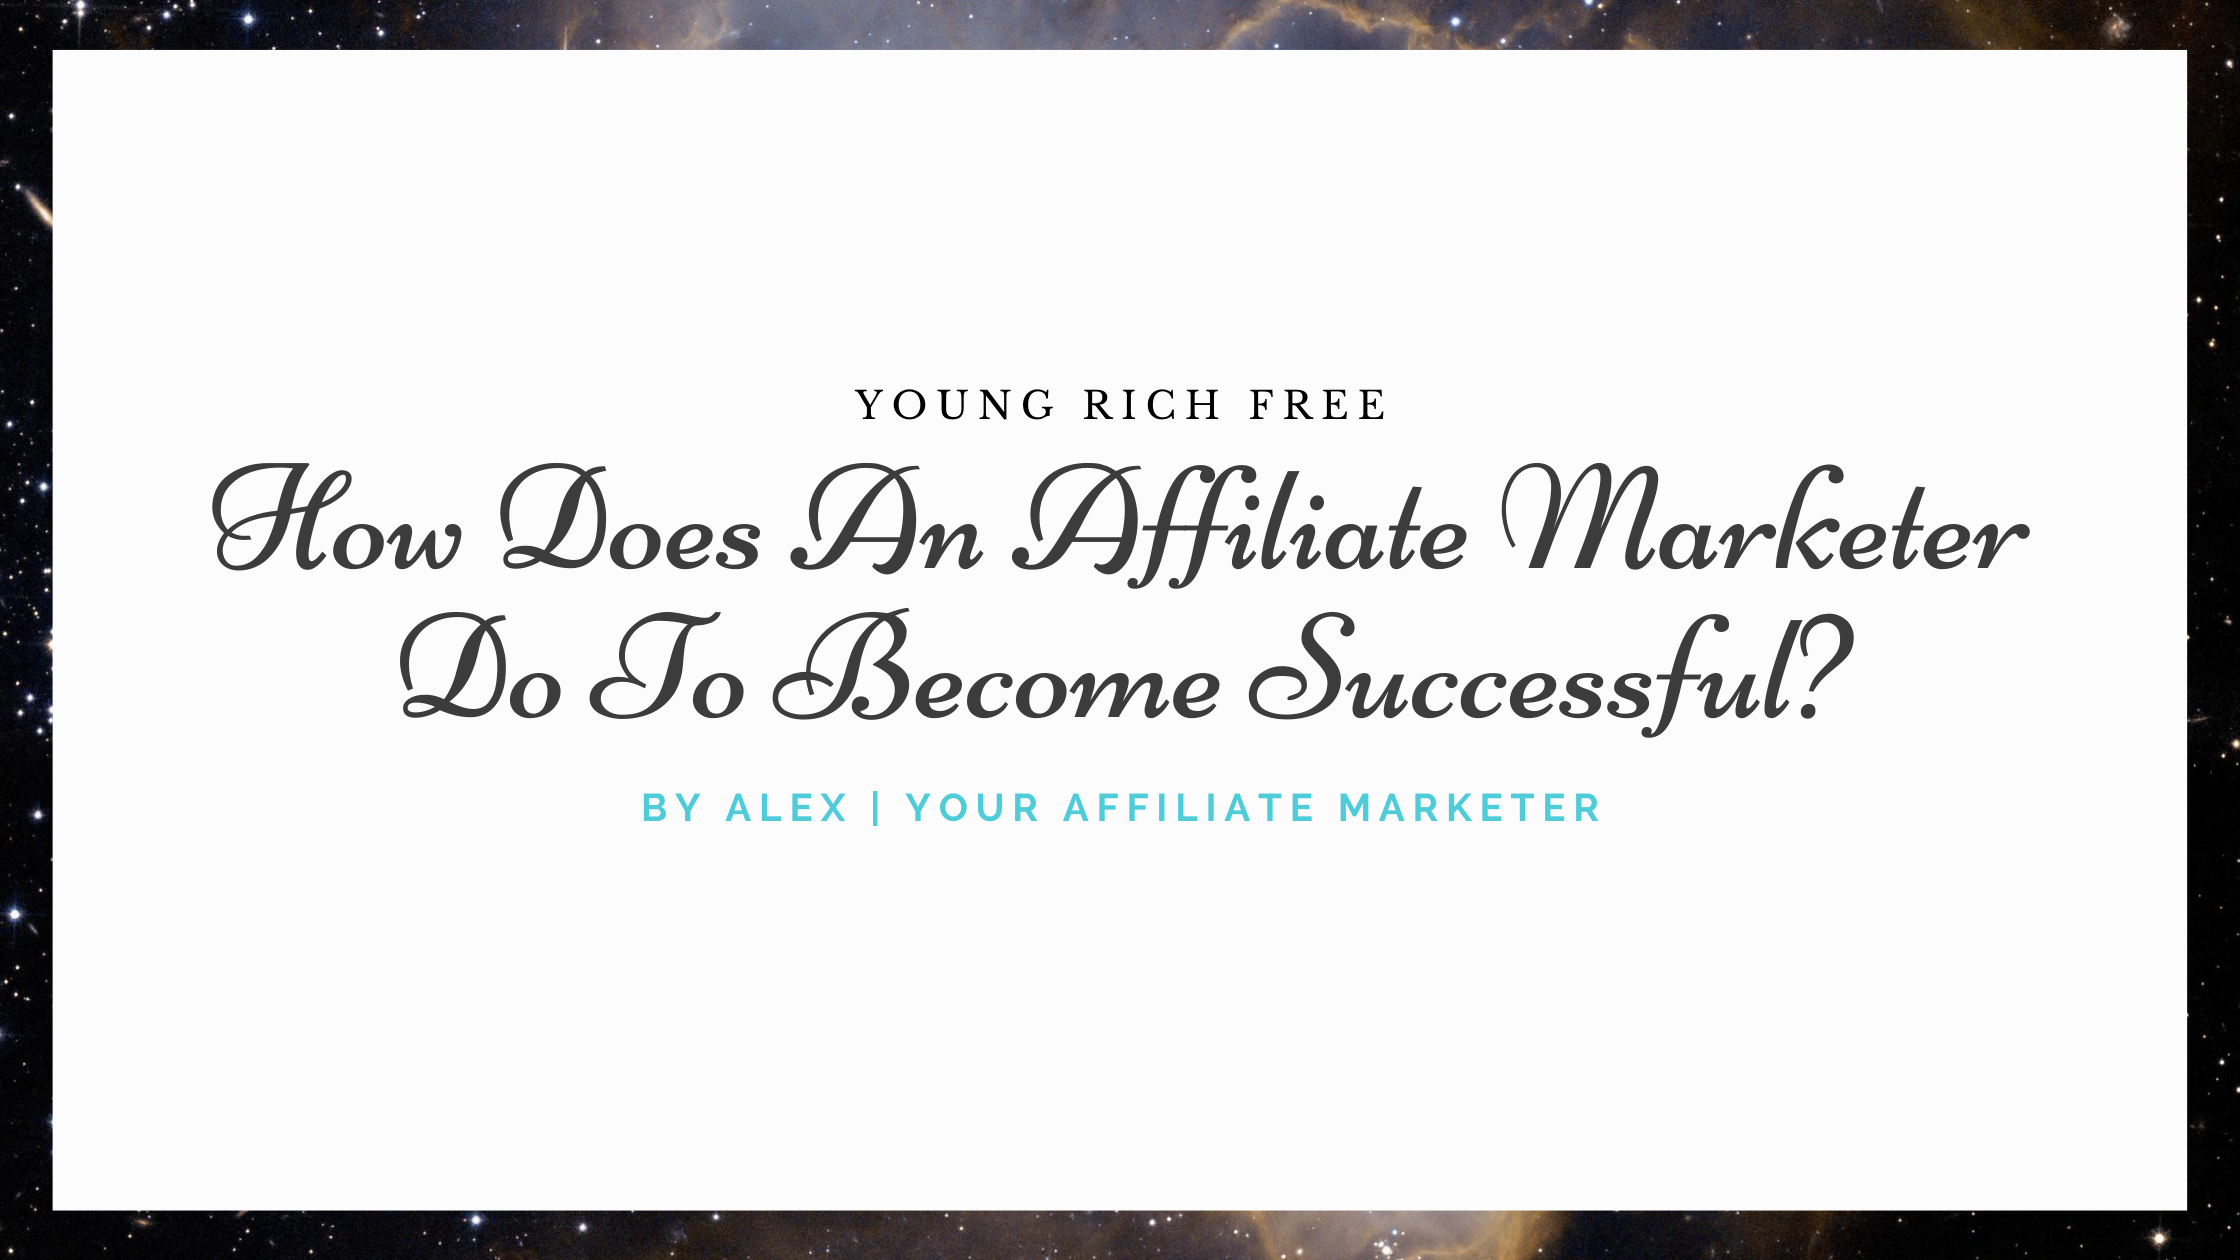 How Does An Affiliate Marketer Do To Become Successful